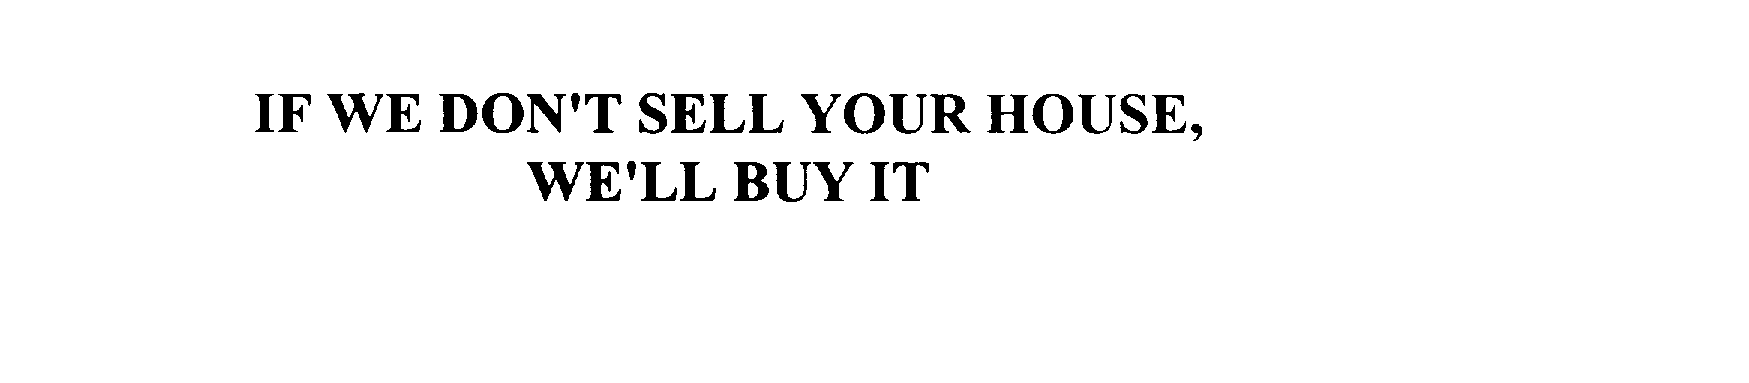  IF WE DON'T SELL YOUR HOUSE, WE'LL BUY IT